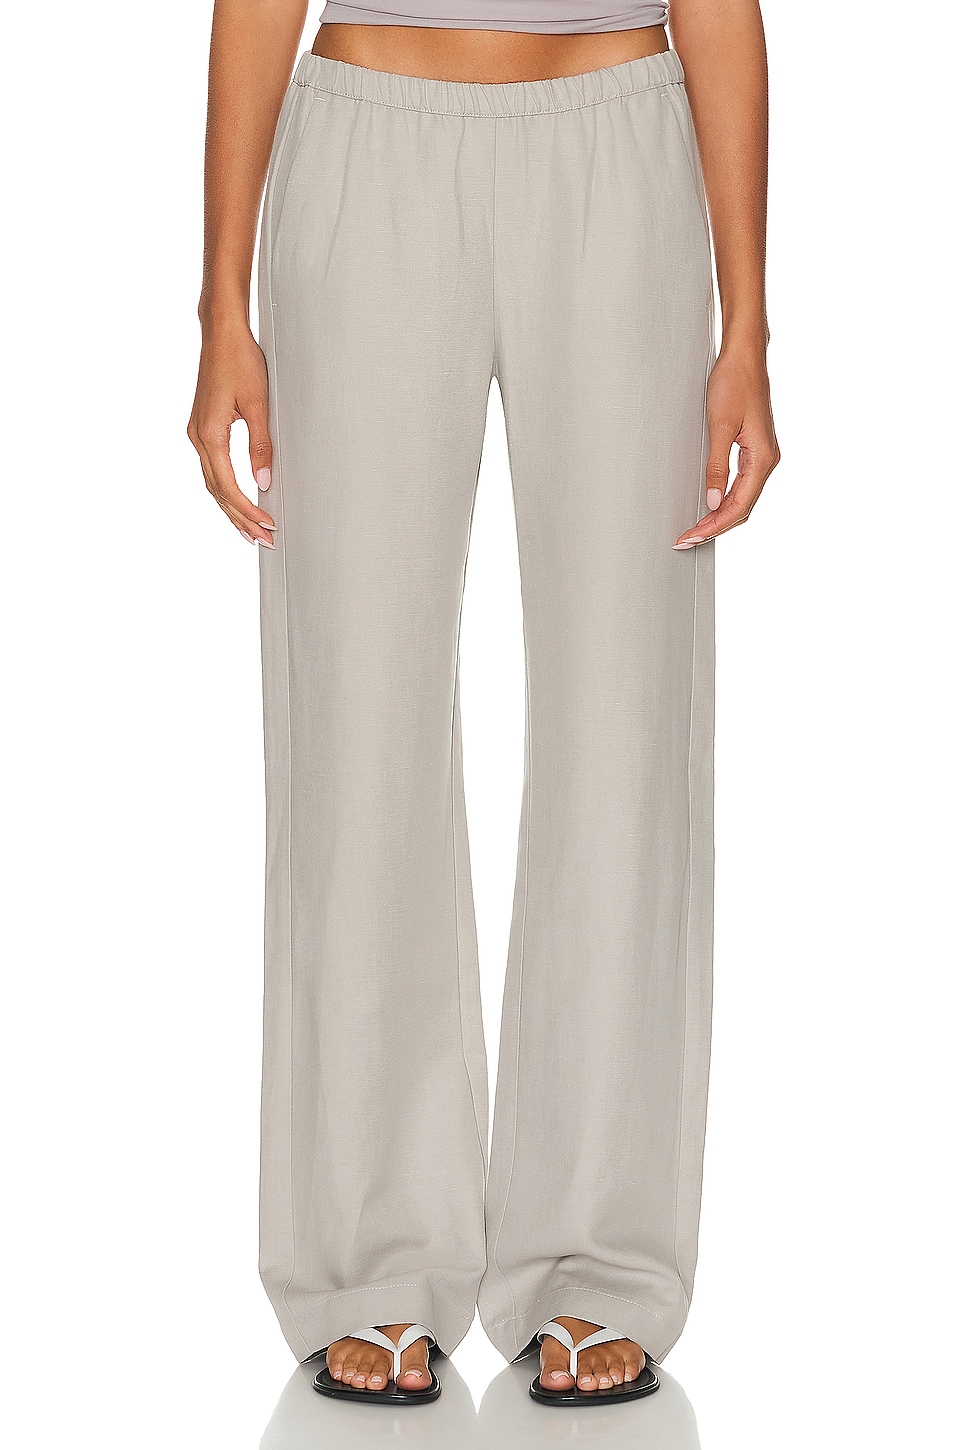 Image 1 of Enza Costa Twill Everywhere Pant in Limestone